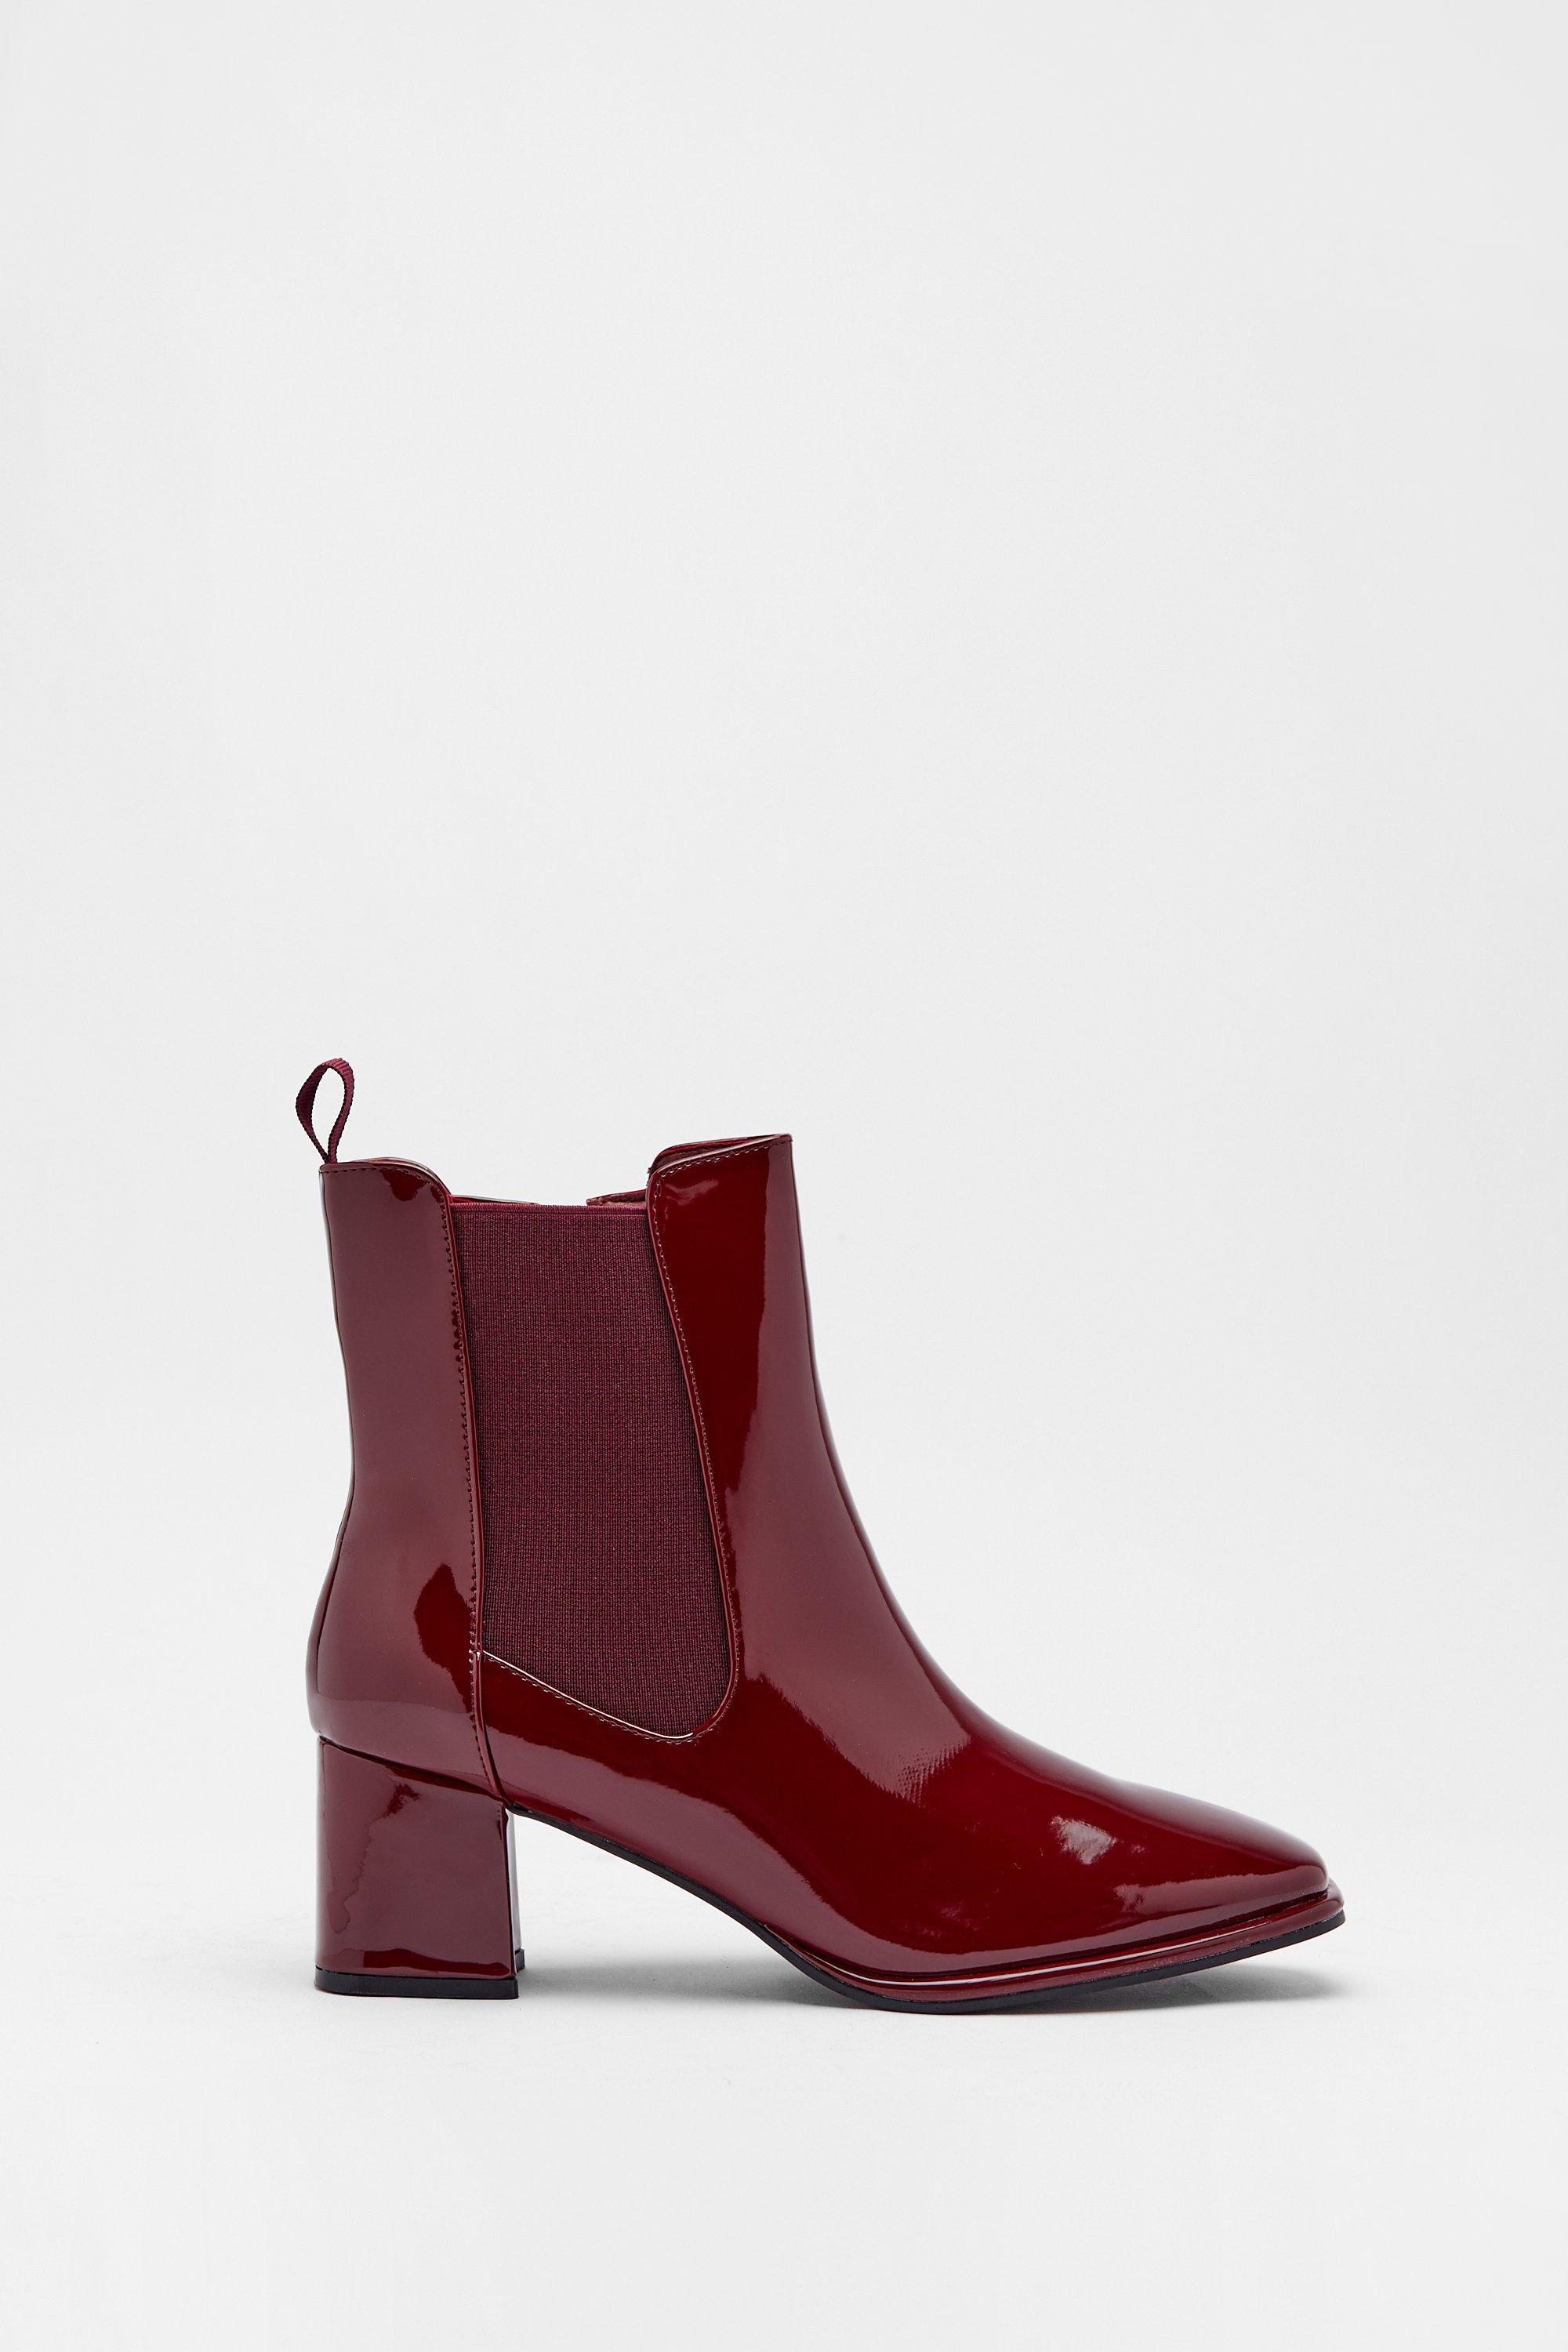 Womens Patent Heeled Chelsea Boots - wine